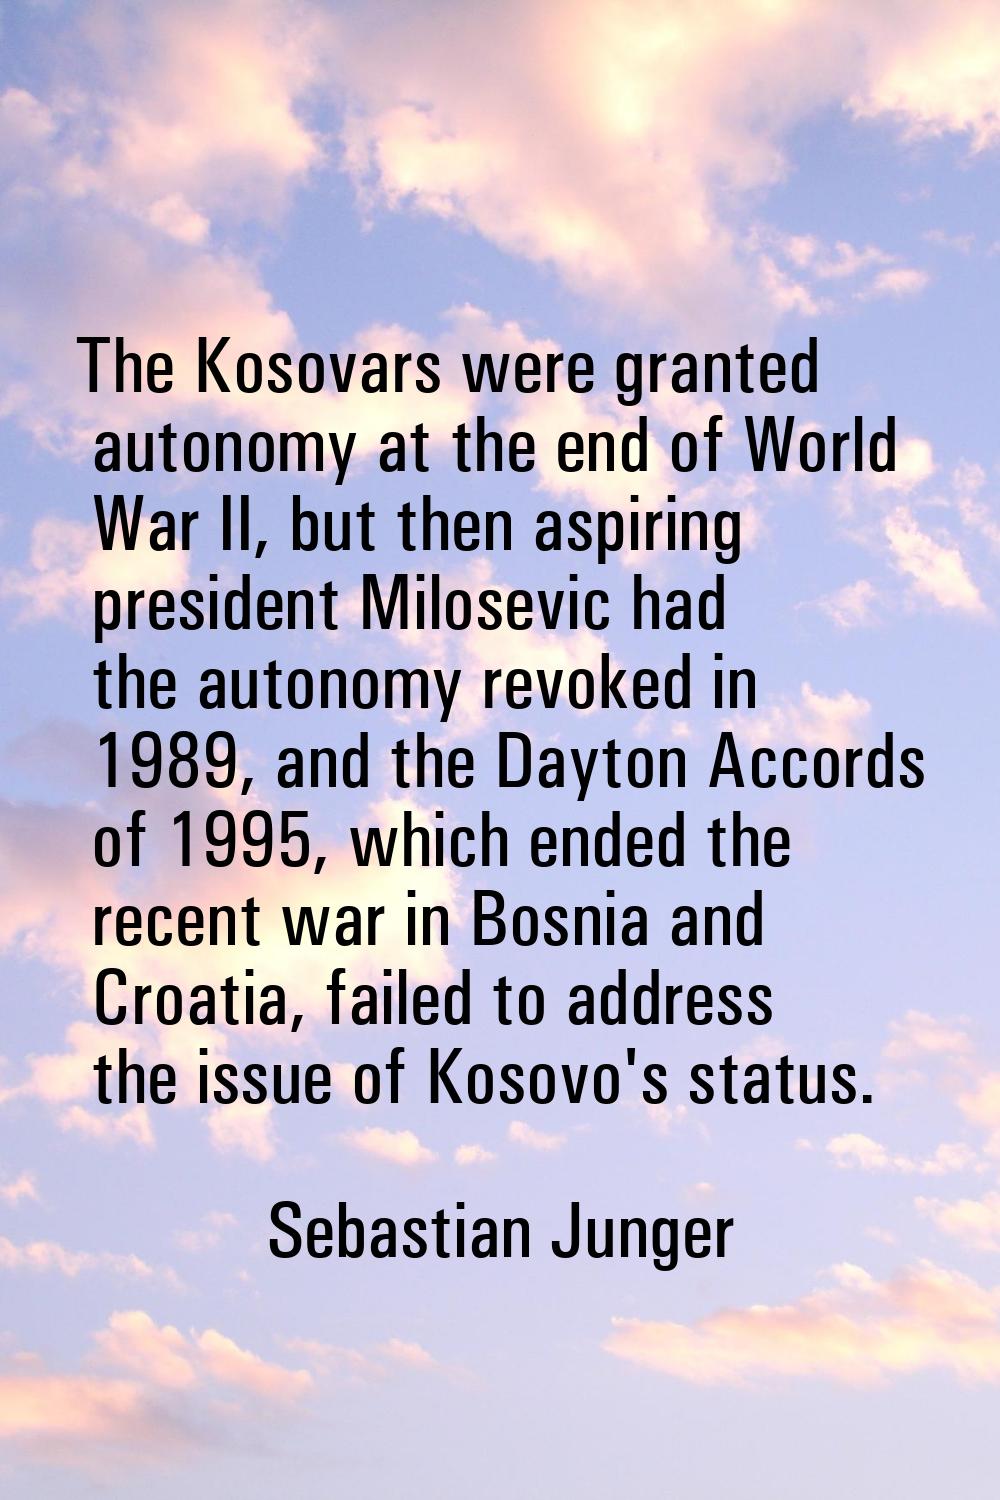 The Kosovars were granted autonomy at the end of World War II, but then aspiring president Milosevi